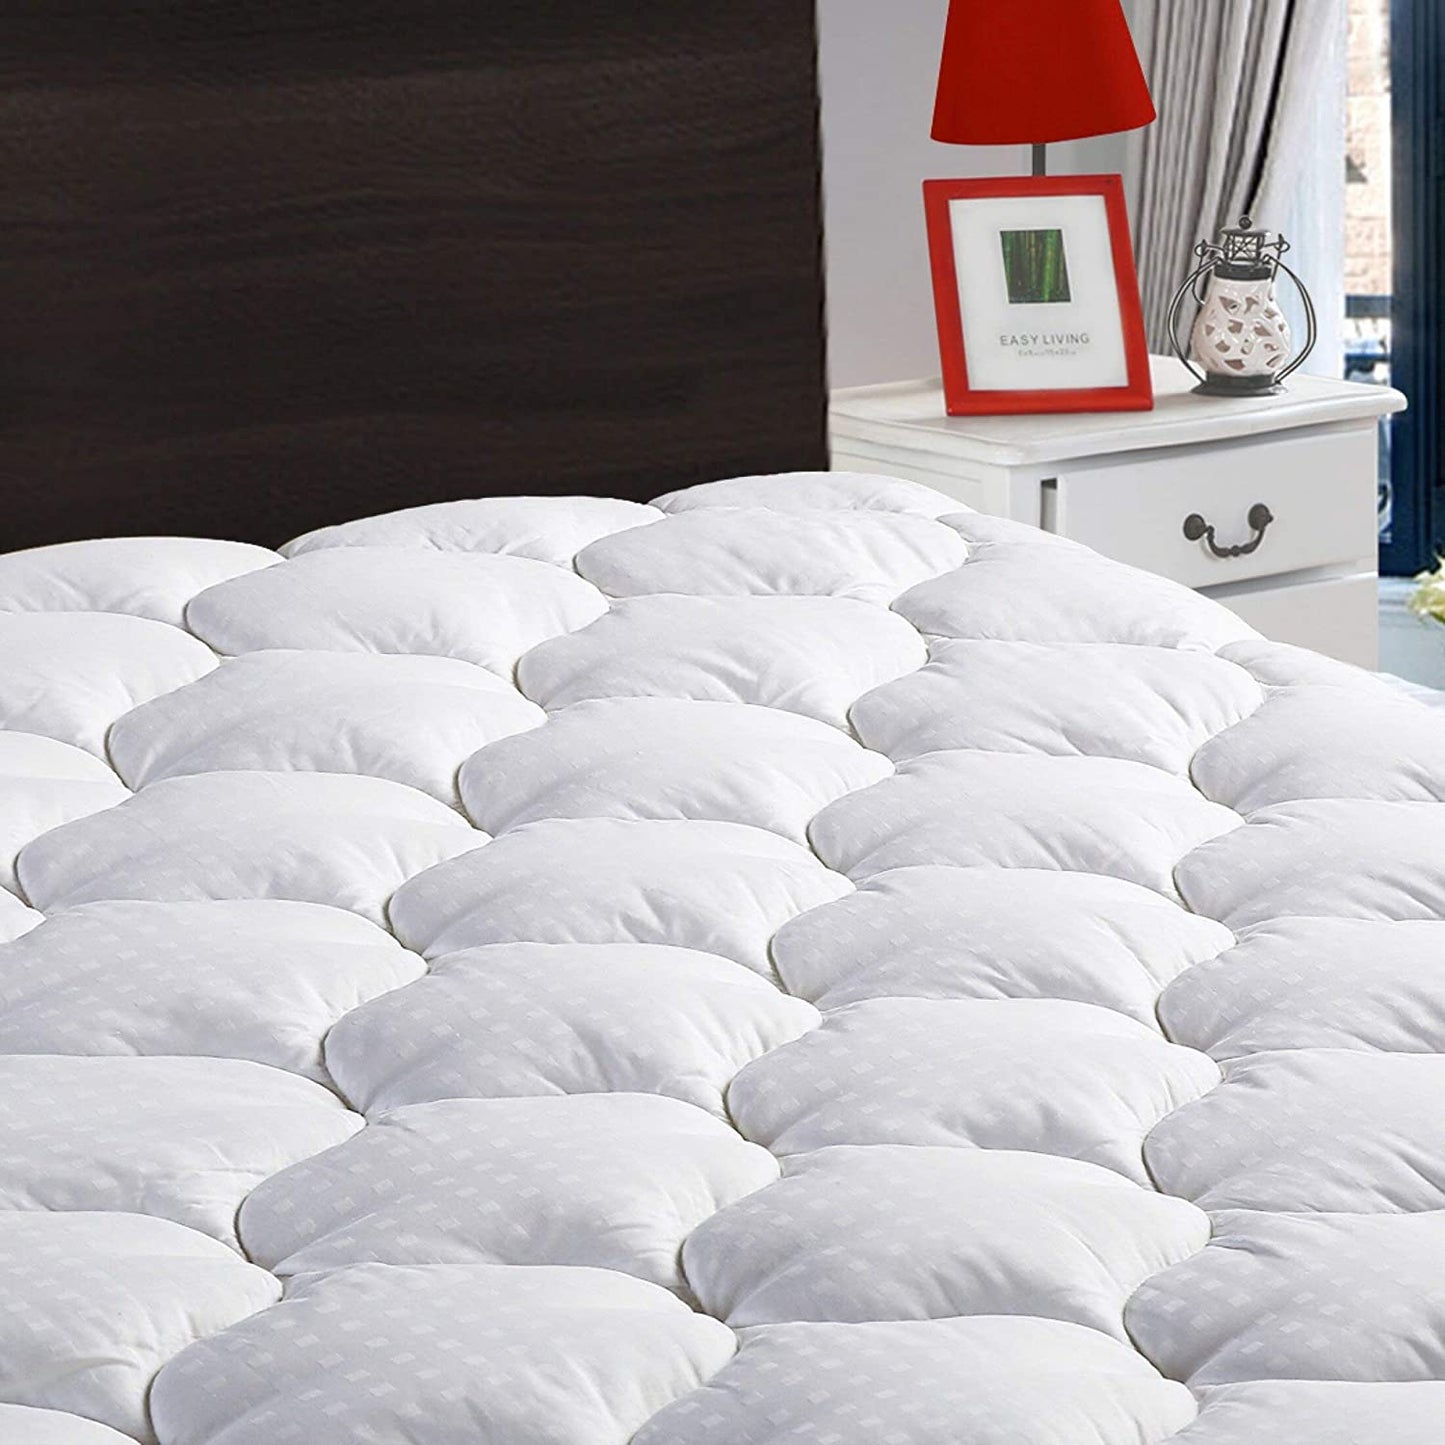 LEISURE TOWN King Mattress Pad Cover Cooling Mattress Topper Cotton Top Pillow Top with Snow down Alternative Fill (8-21 Inch Fitted Deep Pocket)